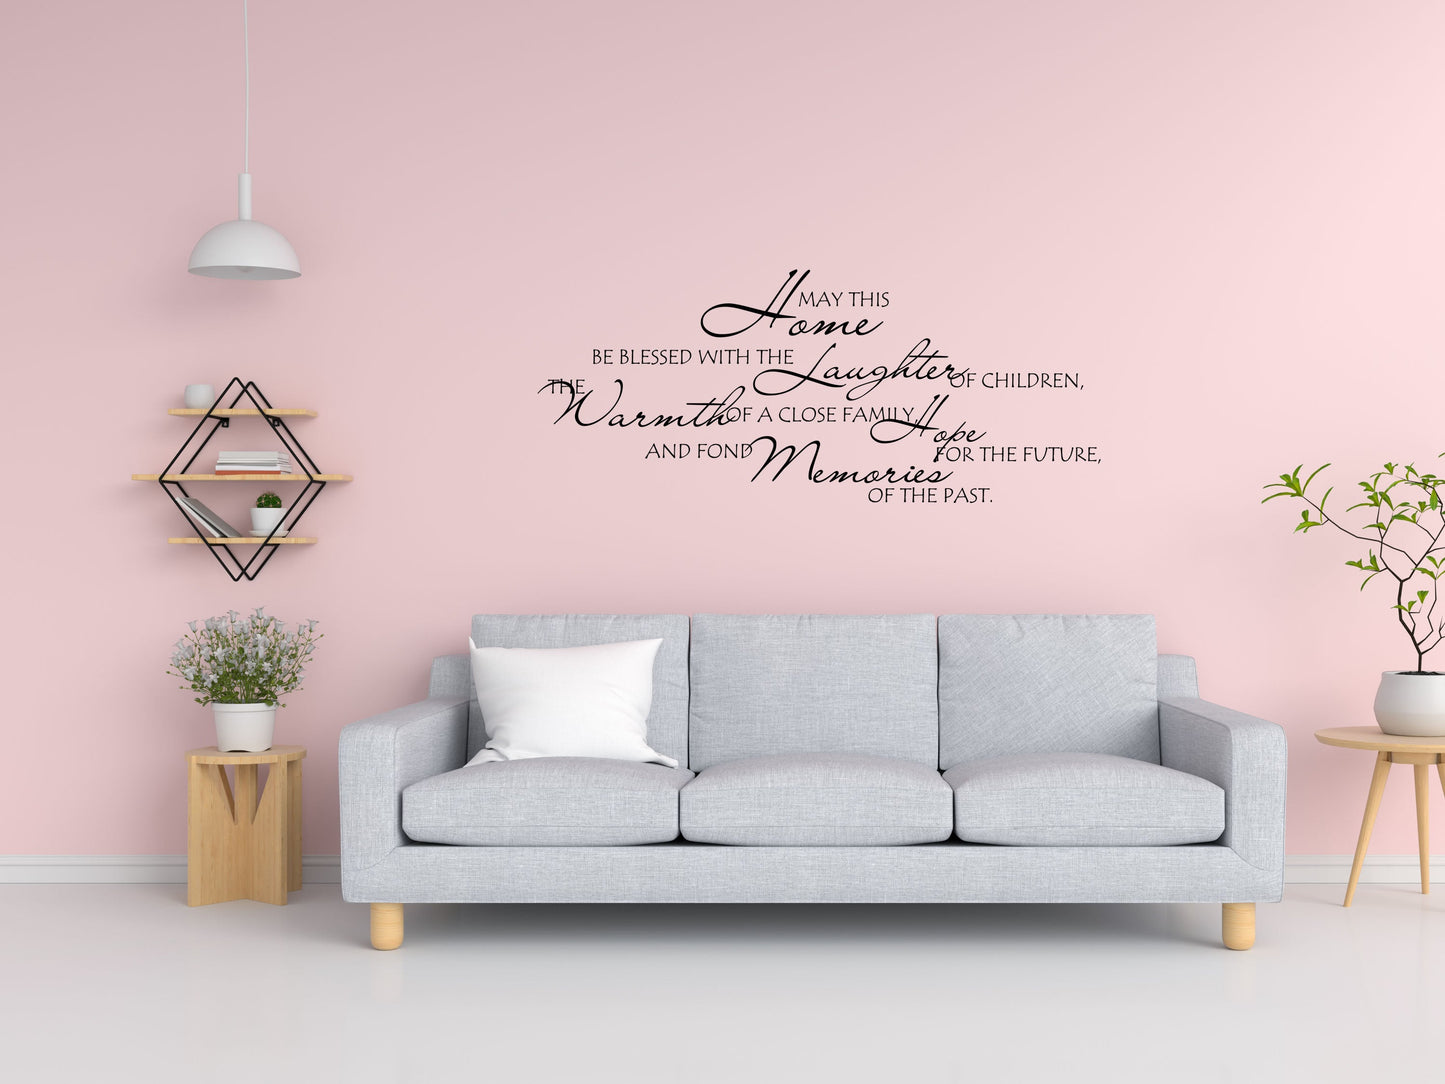 Blessed Home Bedroom Wall Sticker Decal Vinyl Wall Decal Inspirational Wall Signs 